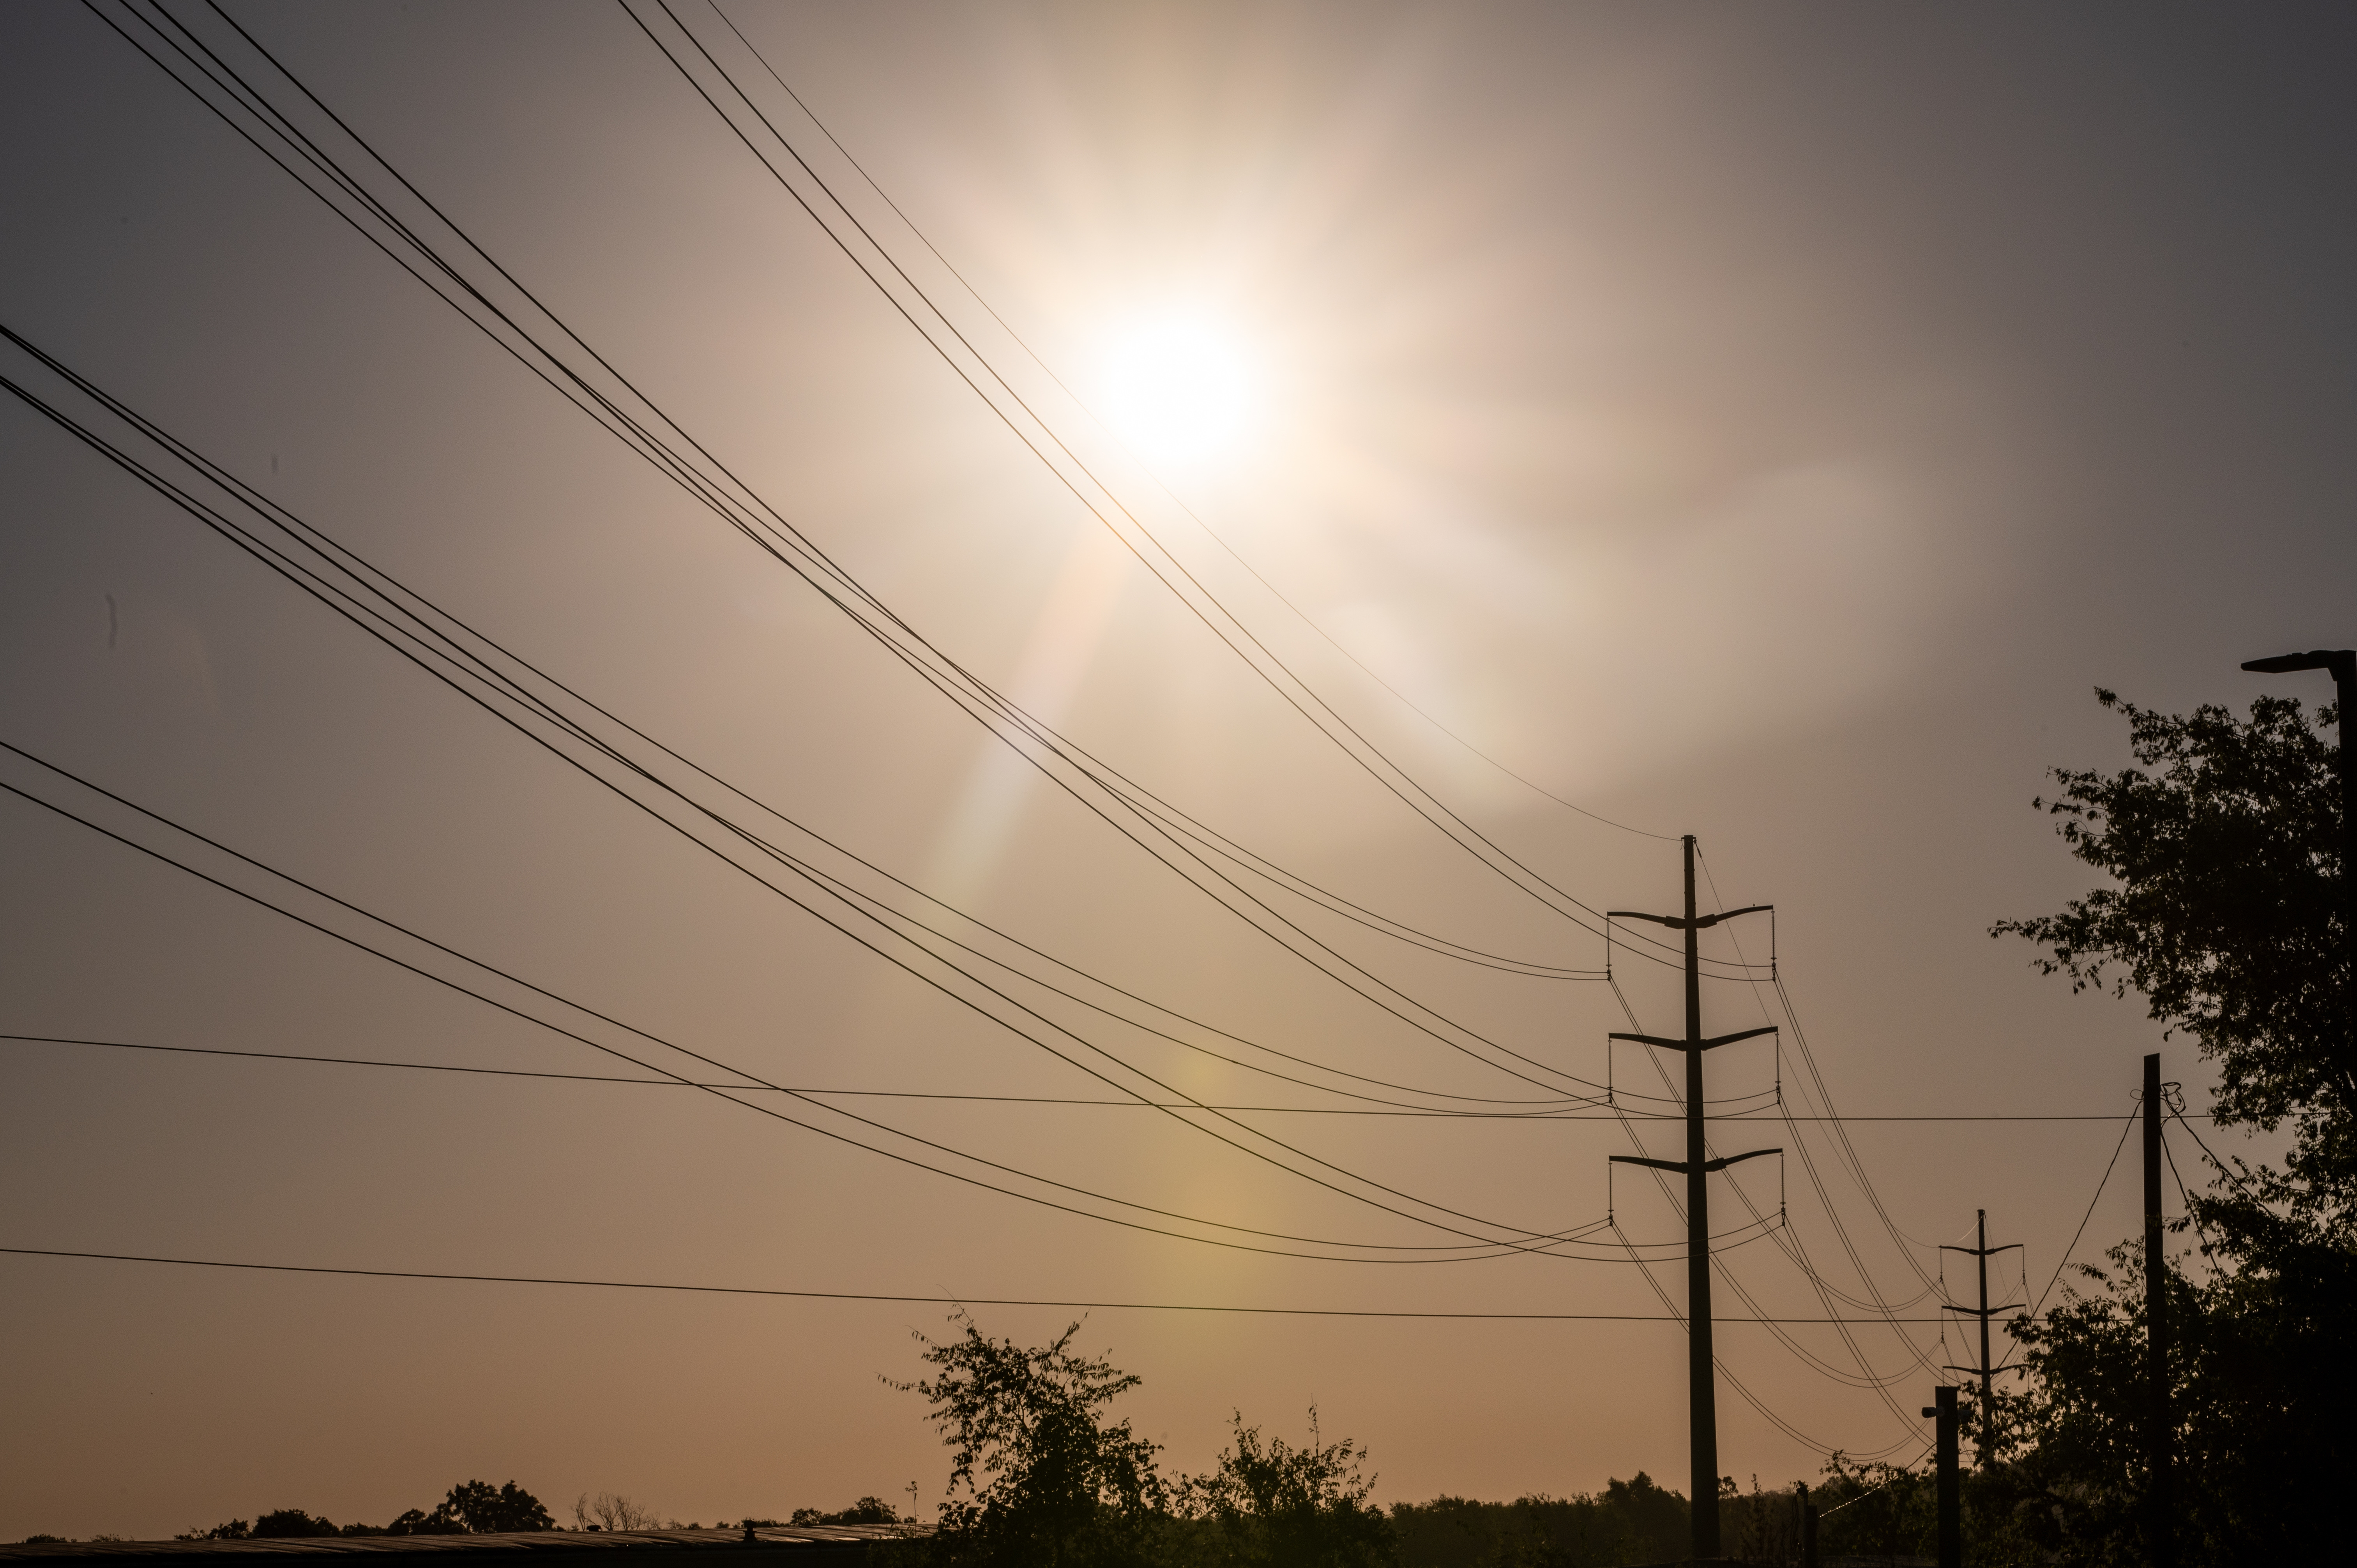 The sun, obscured by a hazy grayish sky, shines above a series of telephone poles and wire.